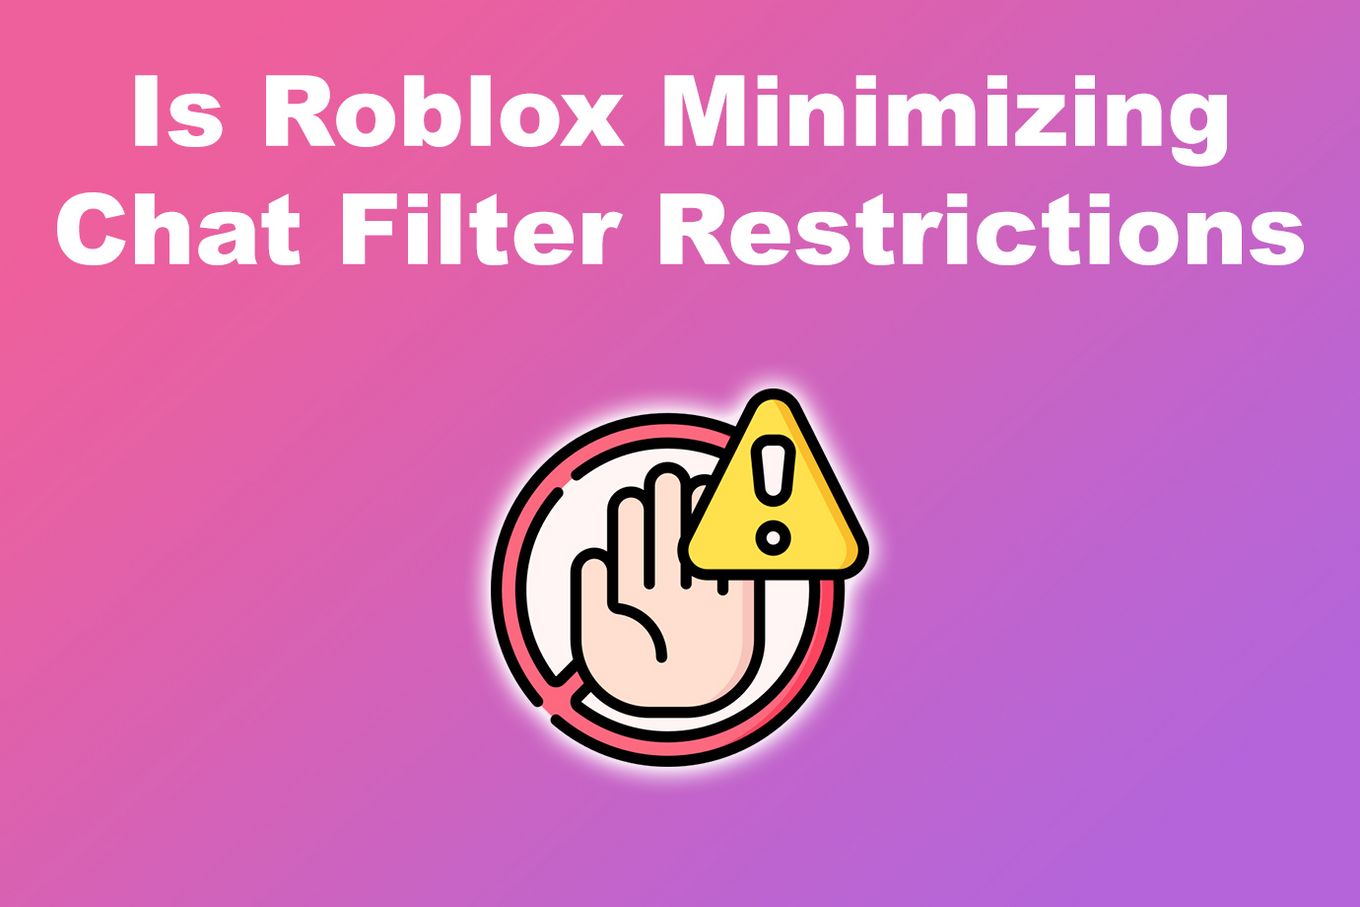 Is Roblox Minimizing Chat Filter Restrictions